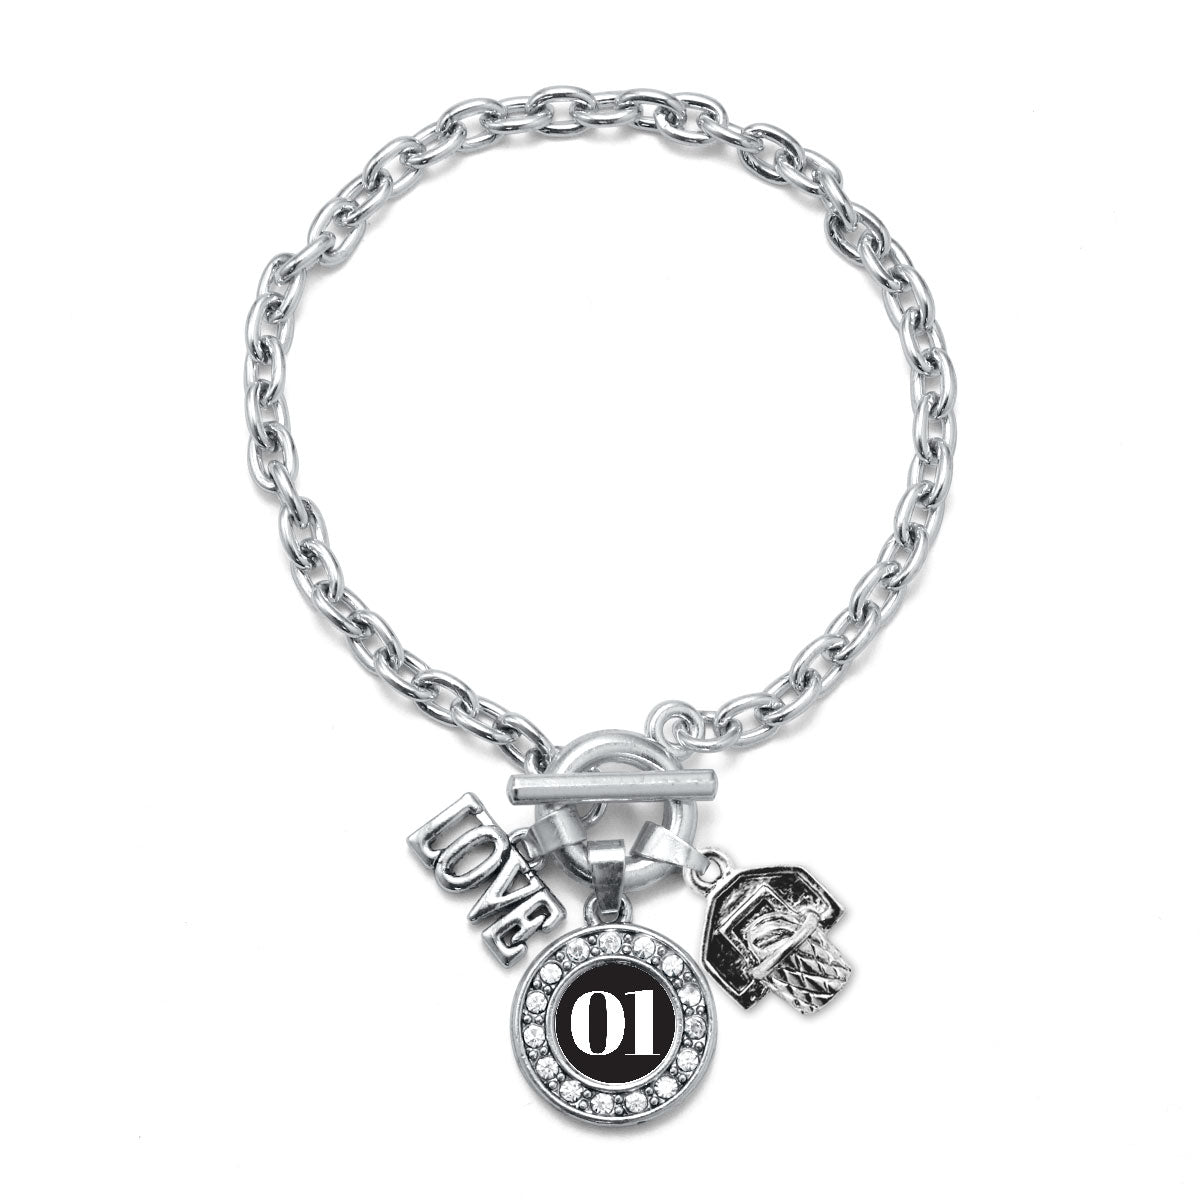 Silver Basketball Hoop - Sports Number 01 Circle Charm Toggle Bracelet